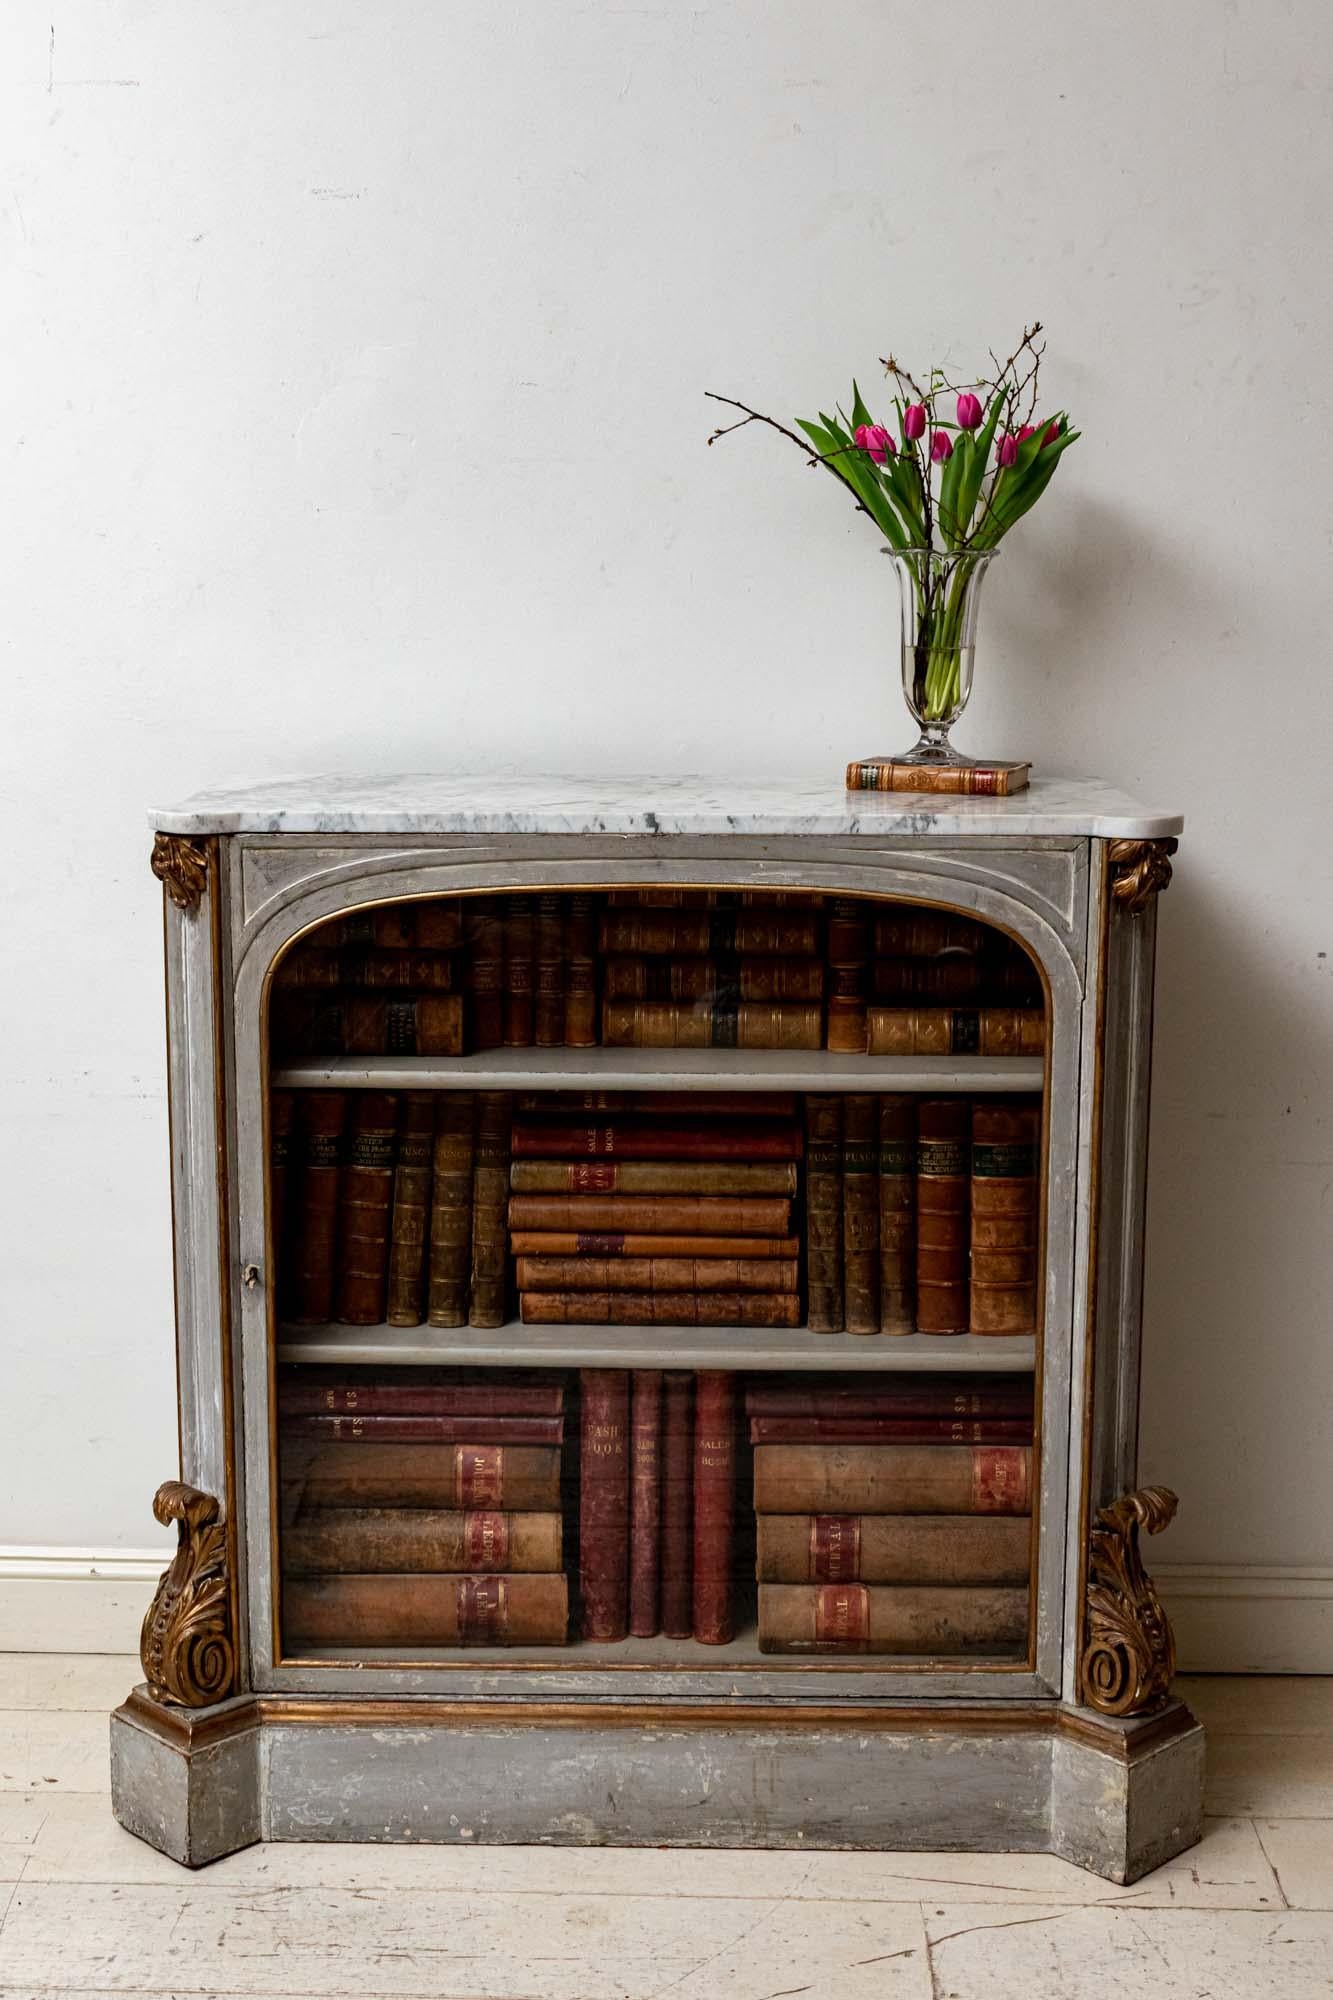 Wonderful early 19th century hand painted glazed cabinet or bookcase, with a lovely original shaped Carrara marble top. 
Gilt decoration to the side.
Marble is in excellent condition.
Paint work and gilding is good.
The back has been extended